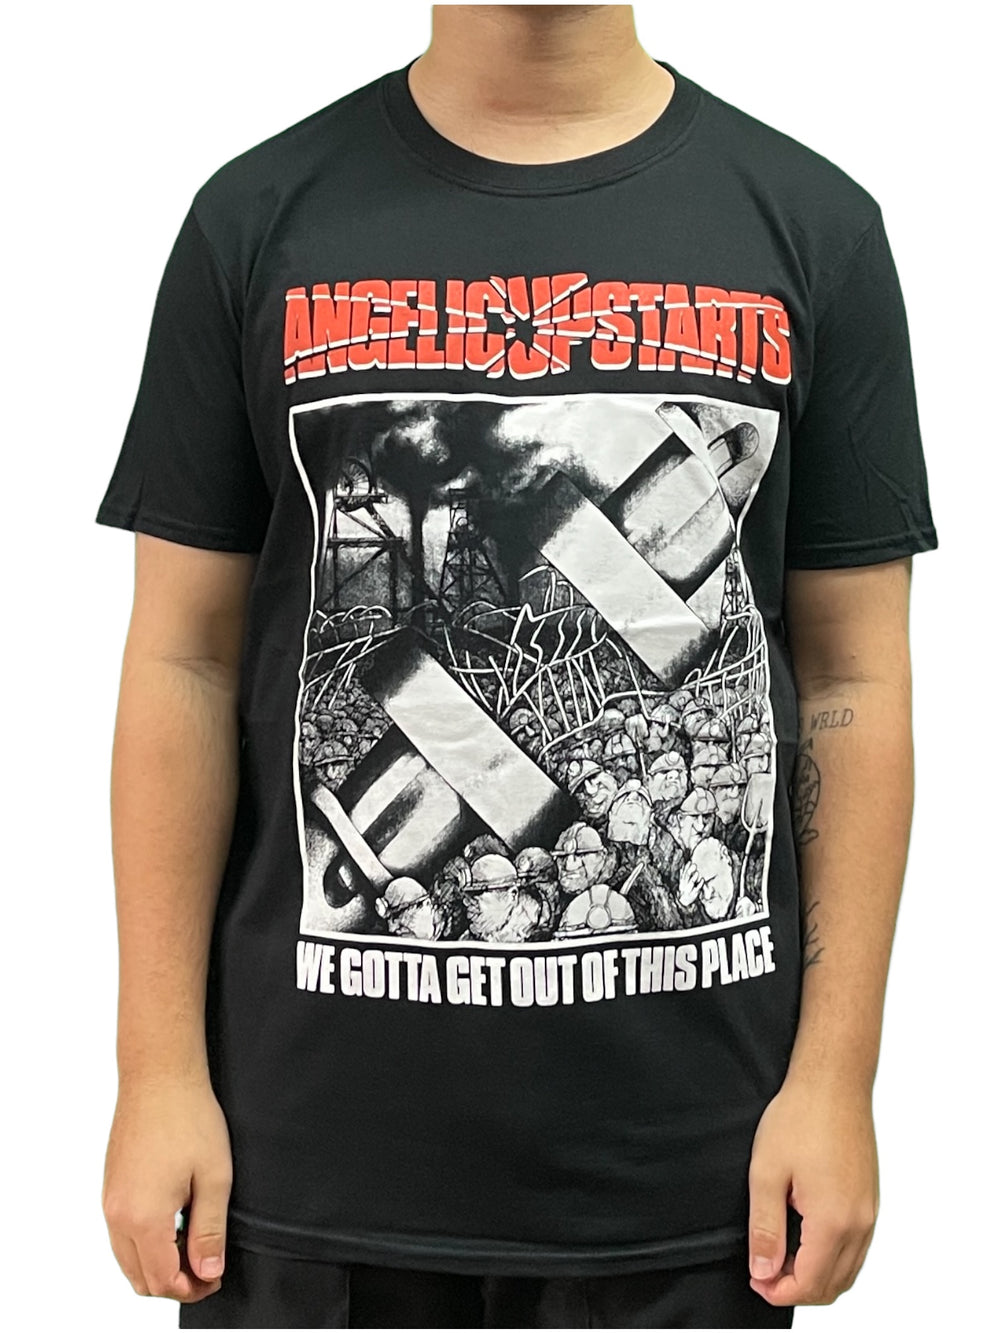 Angelic Upstarts Out Of This Place Unisex Official T Shirt Brand New Various Sizes